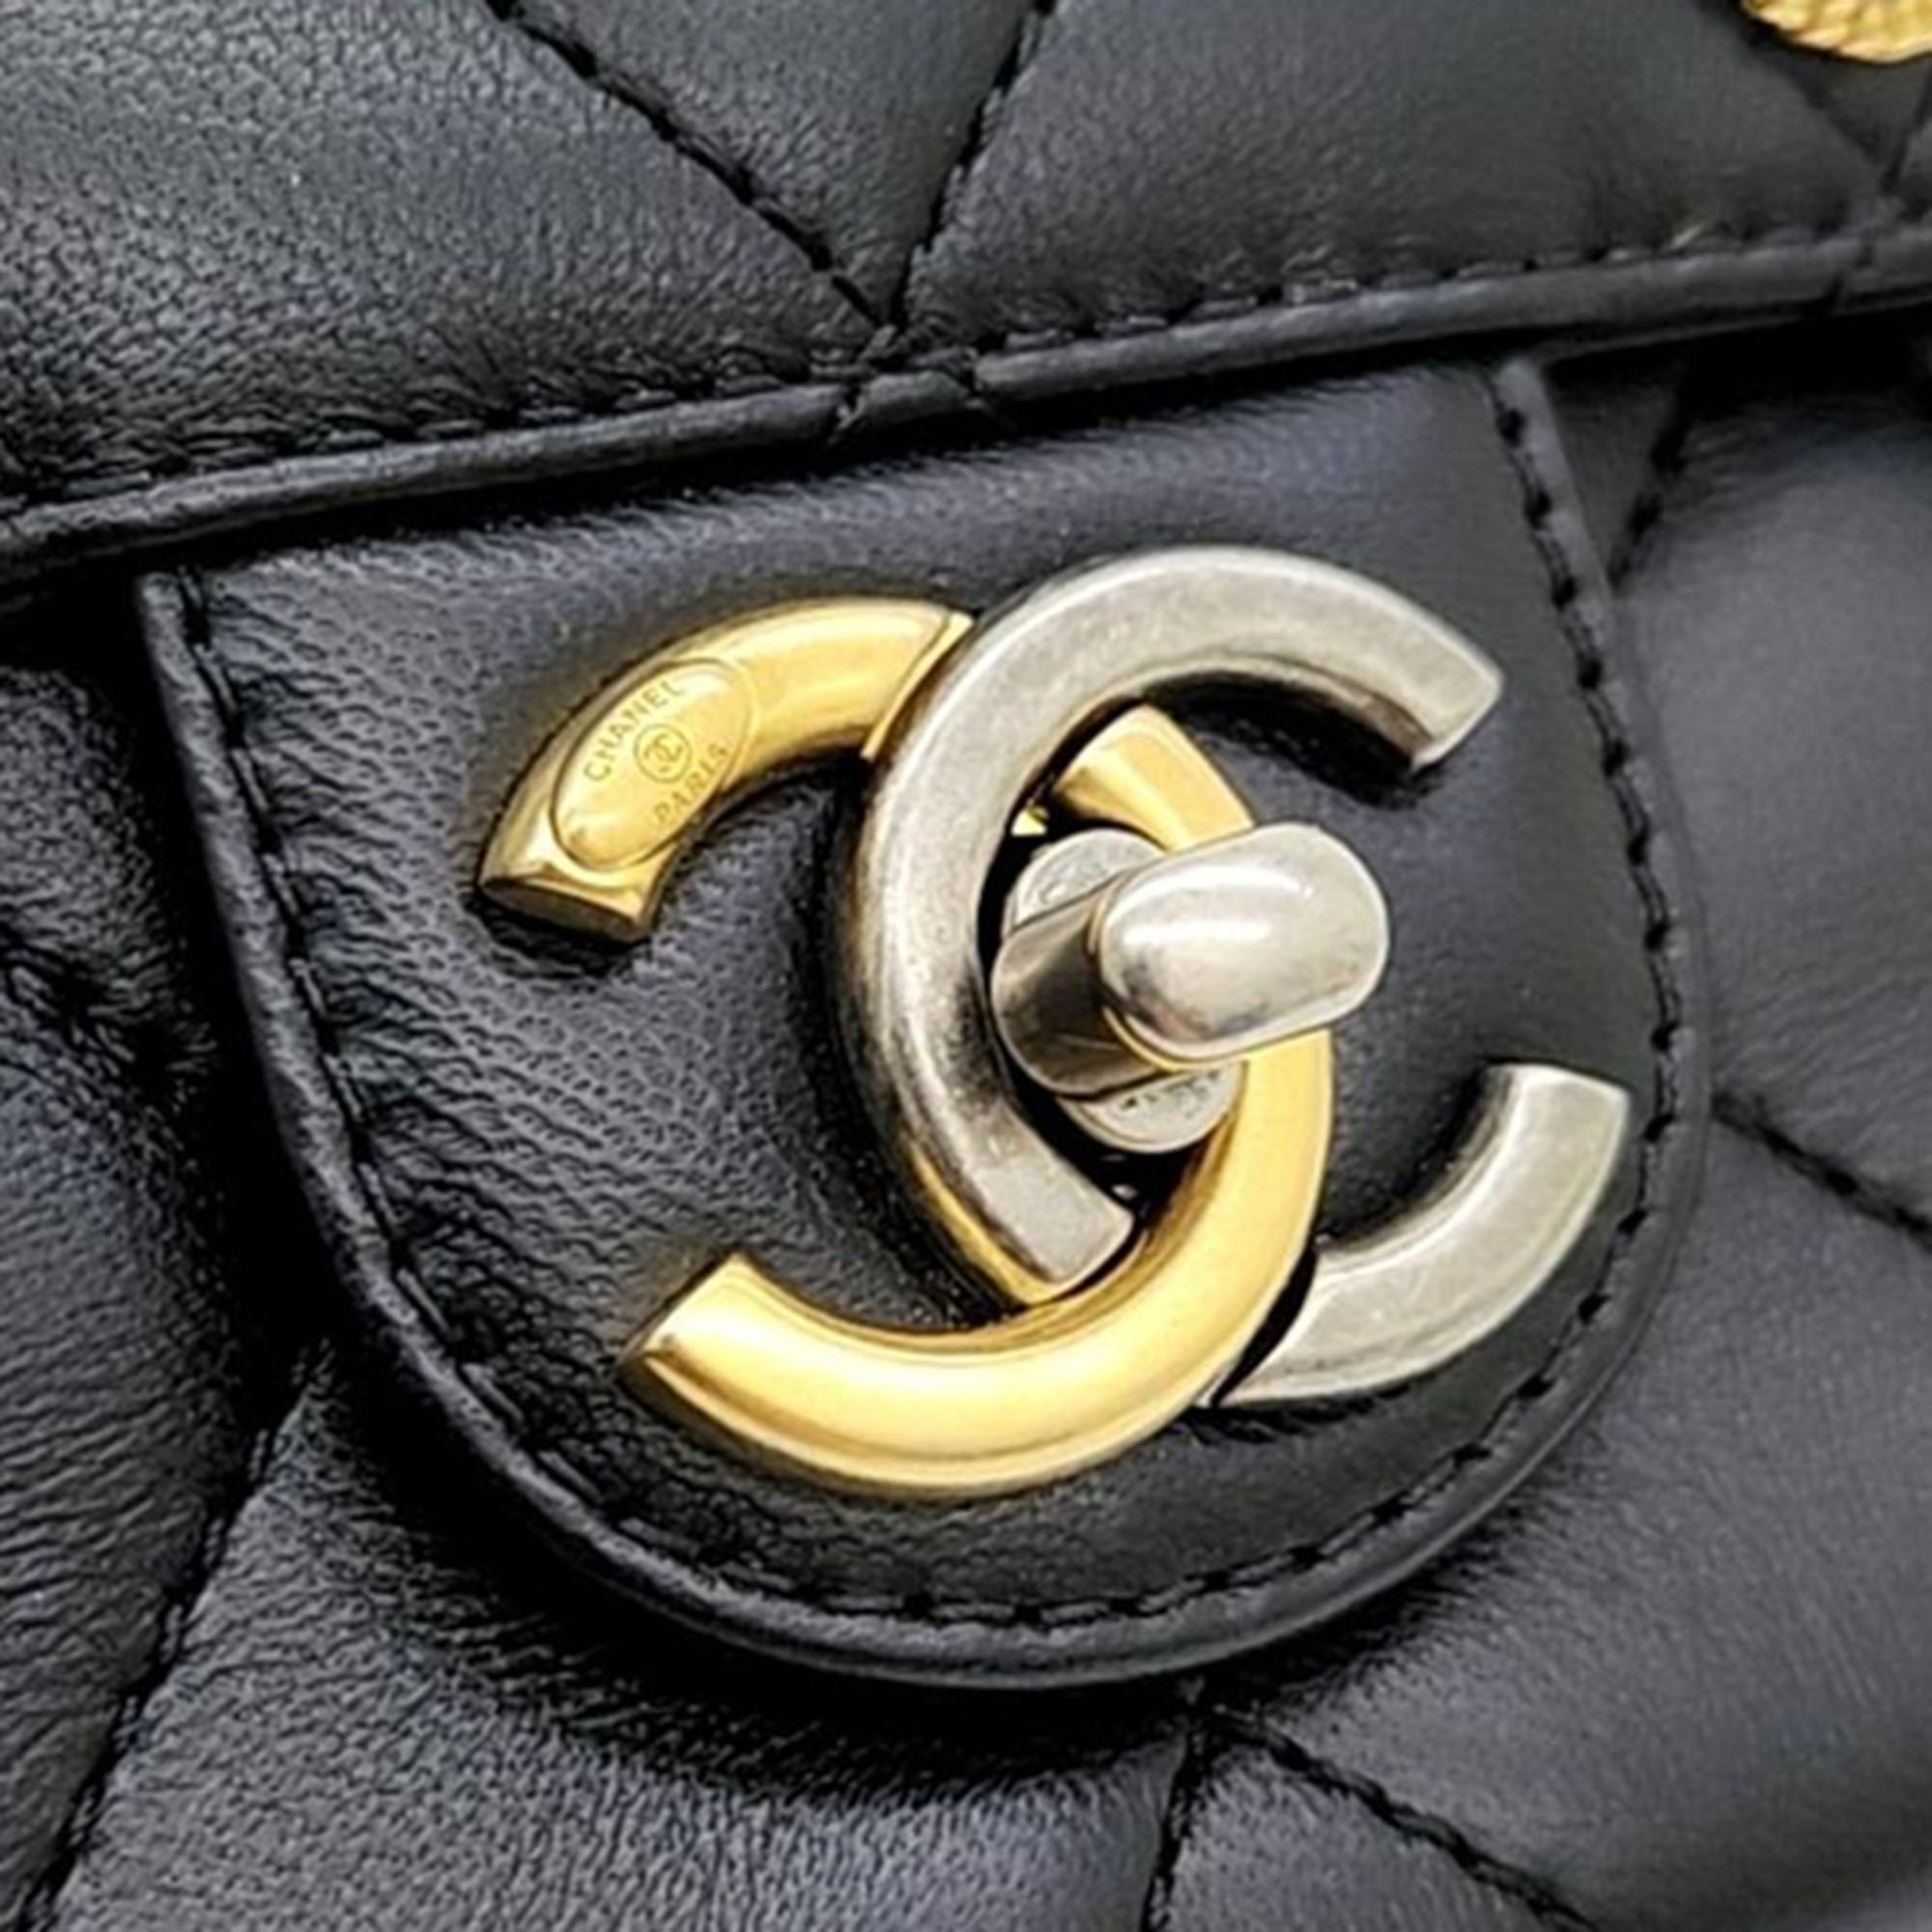 Chanel Classic Trimmed Shoulder Bag Small